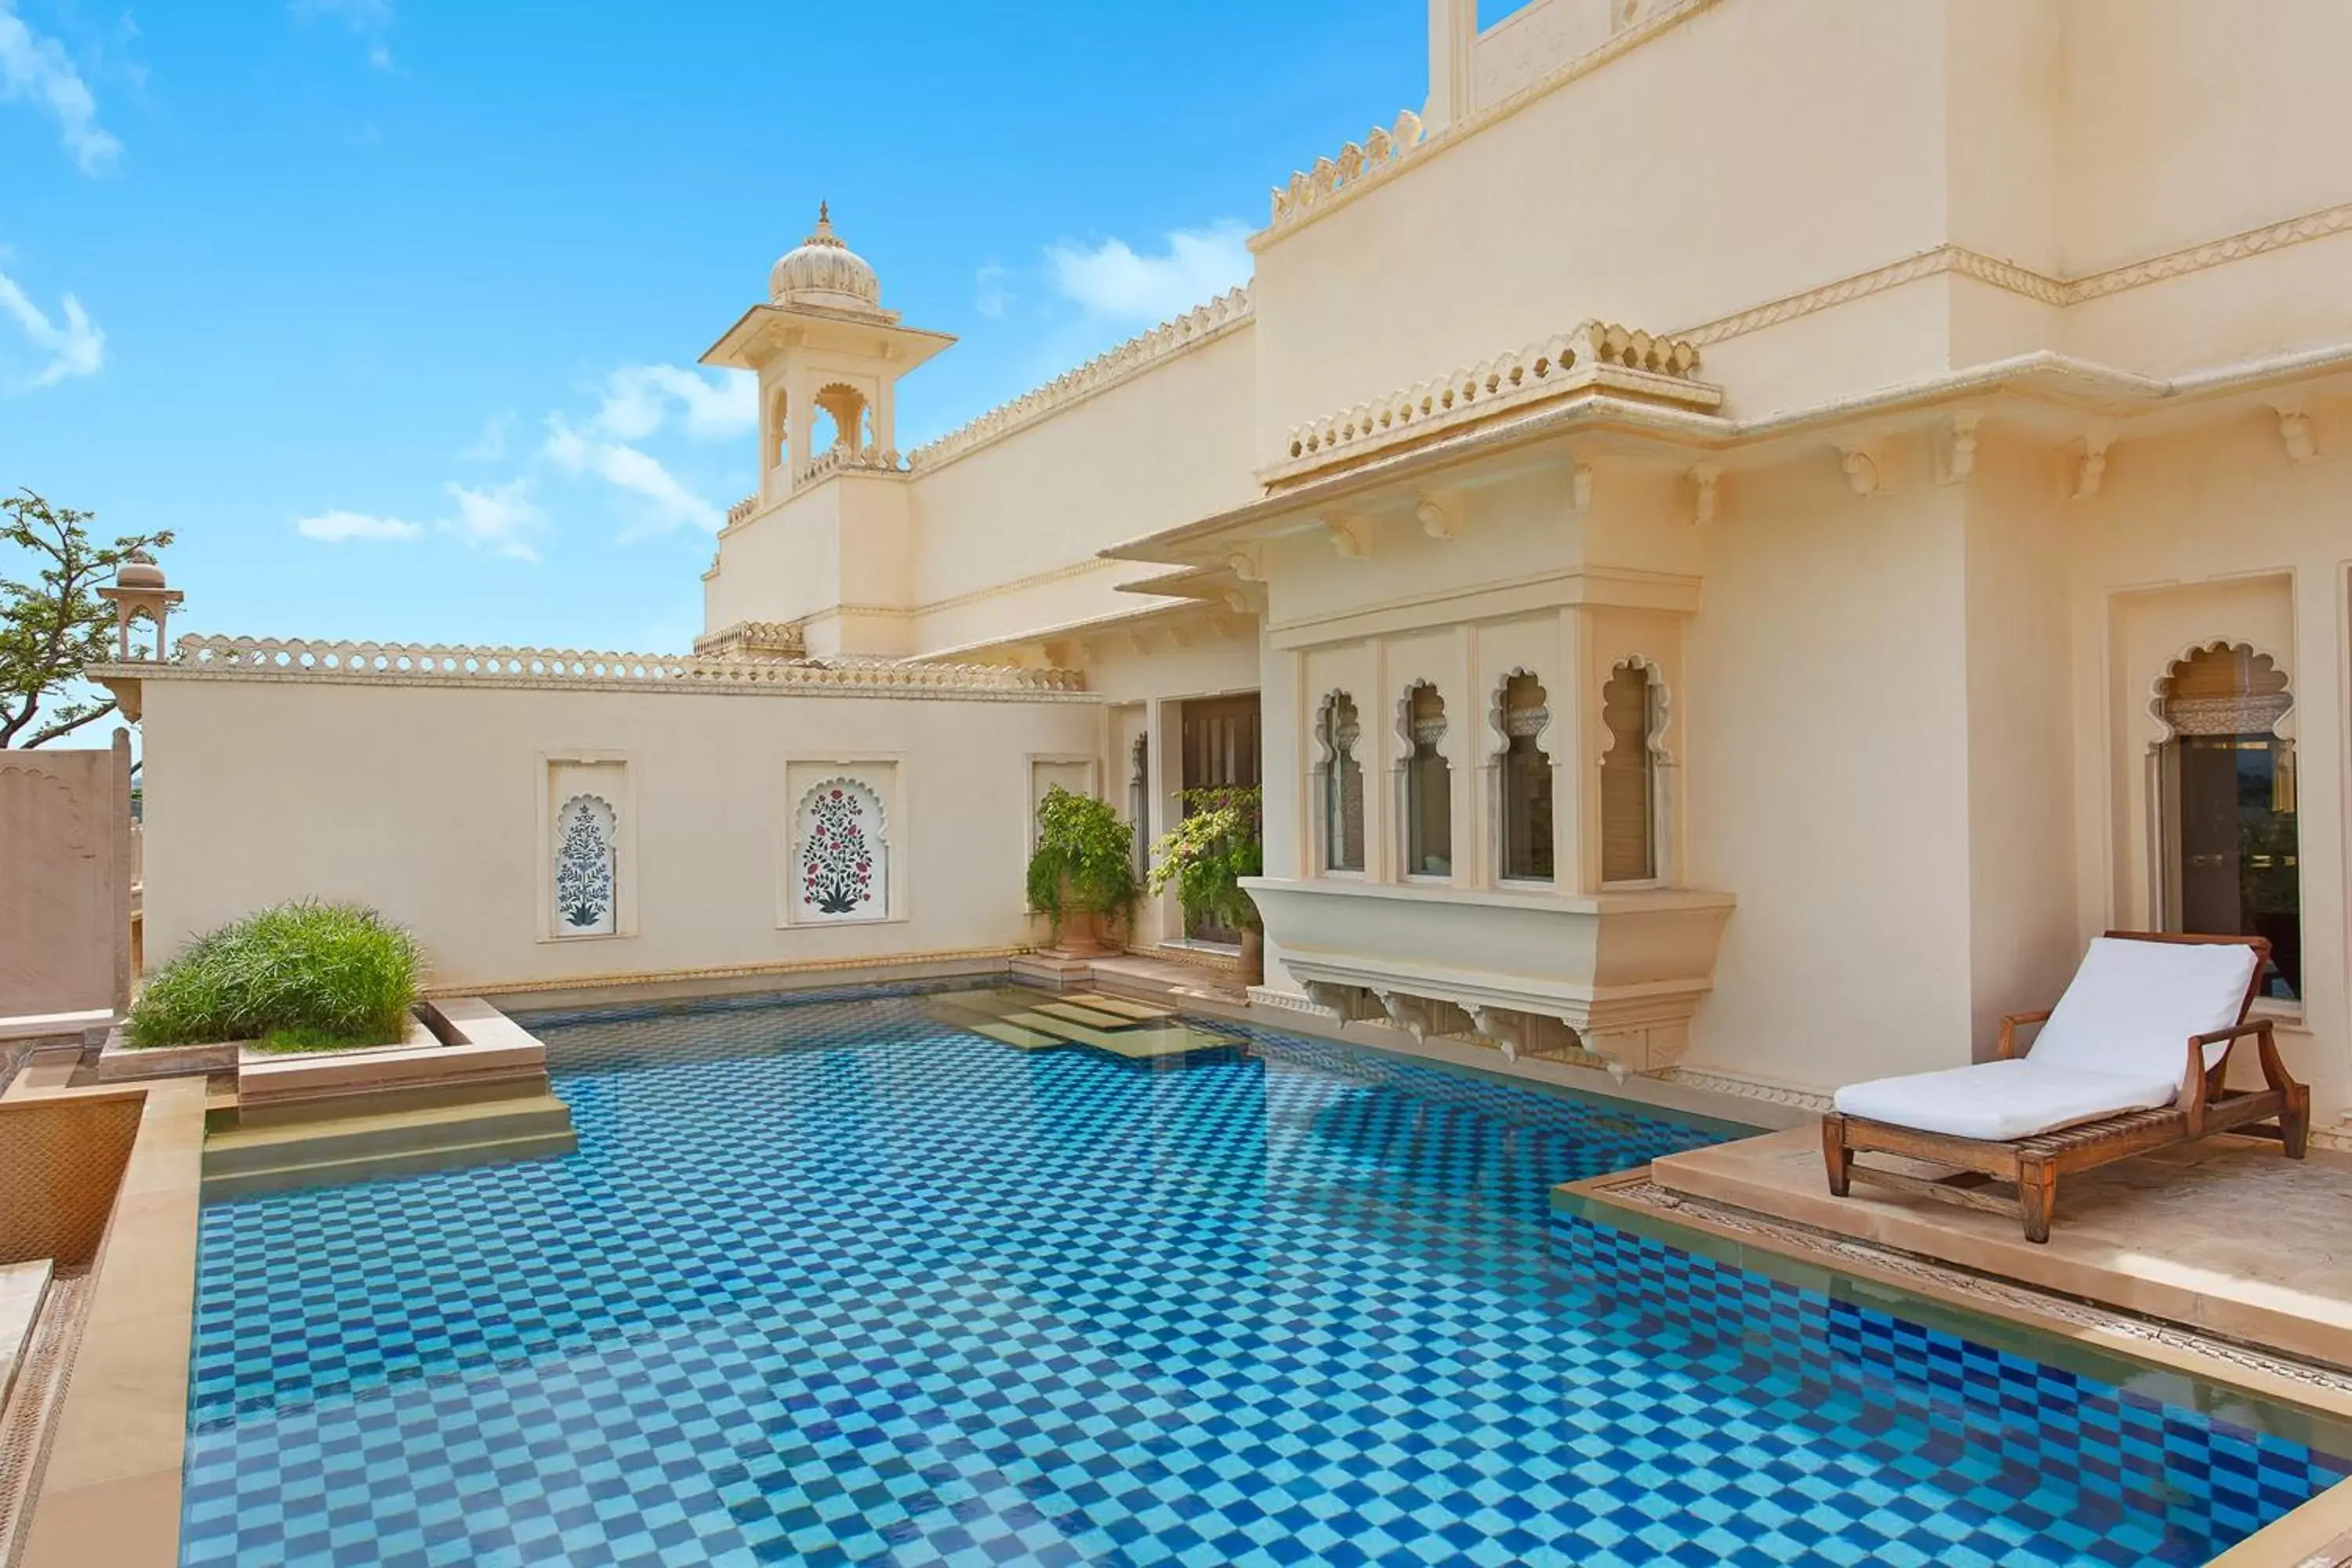 Swimming pool in The Oberoi Udaivilas Udaipur